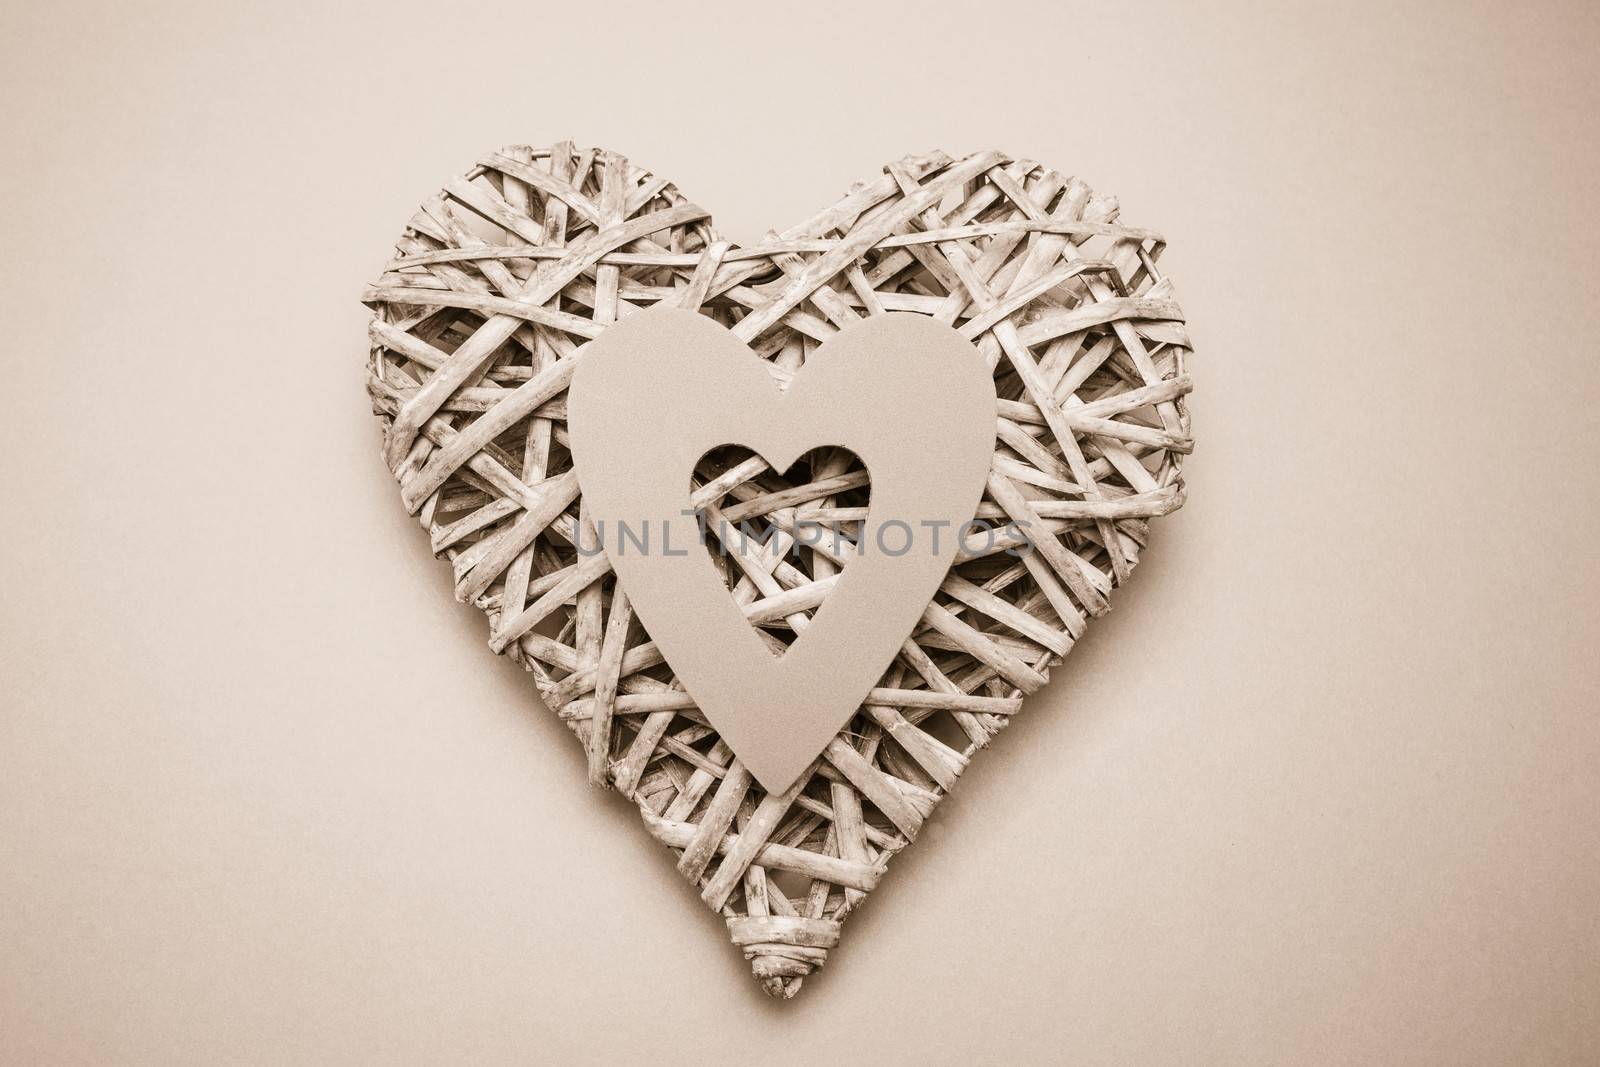 Wicker heart ornament with paper cut out by Wavebreakmedia